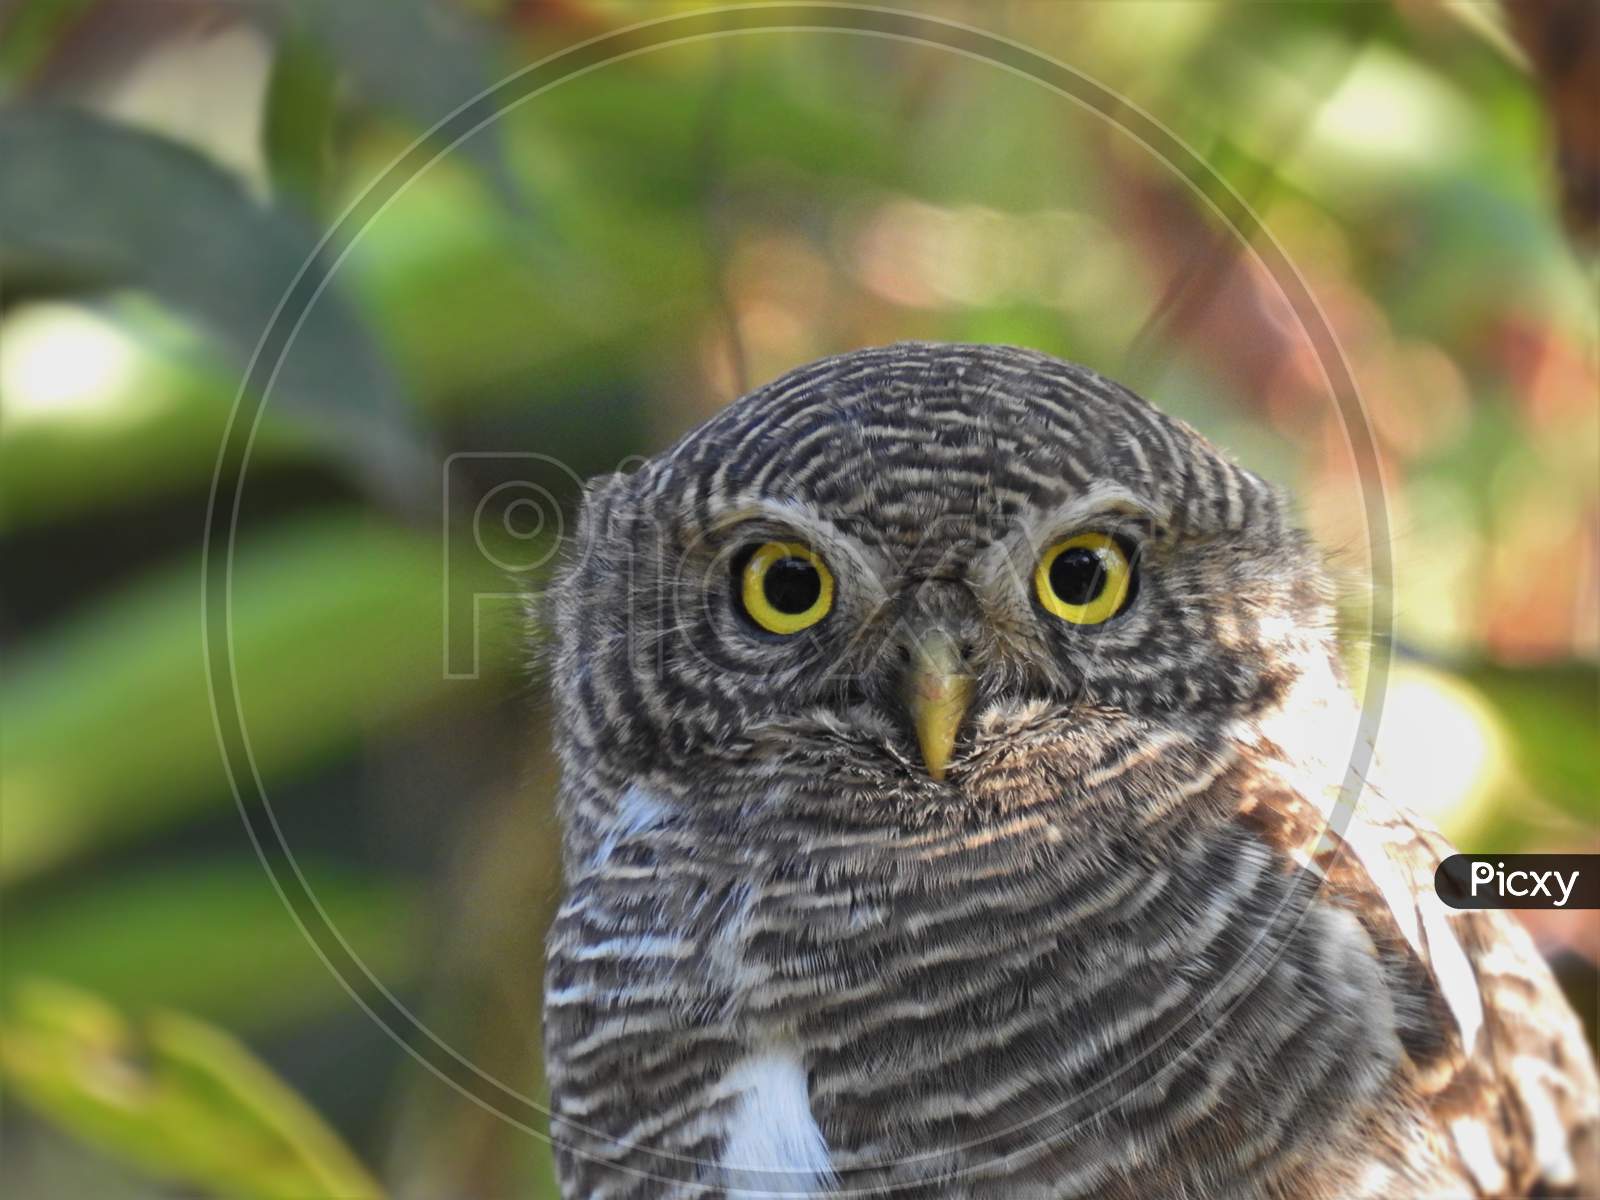 Owl (Asian barred owlet) close up head looking intensely